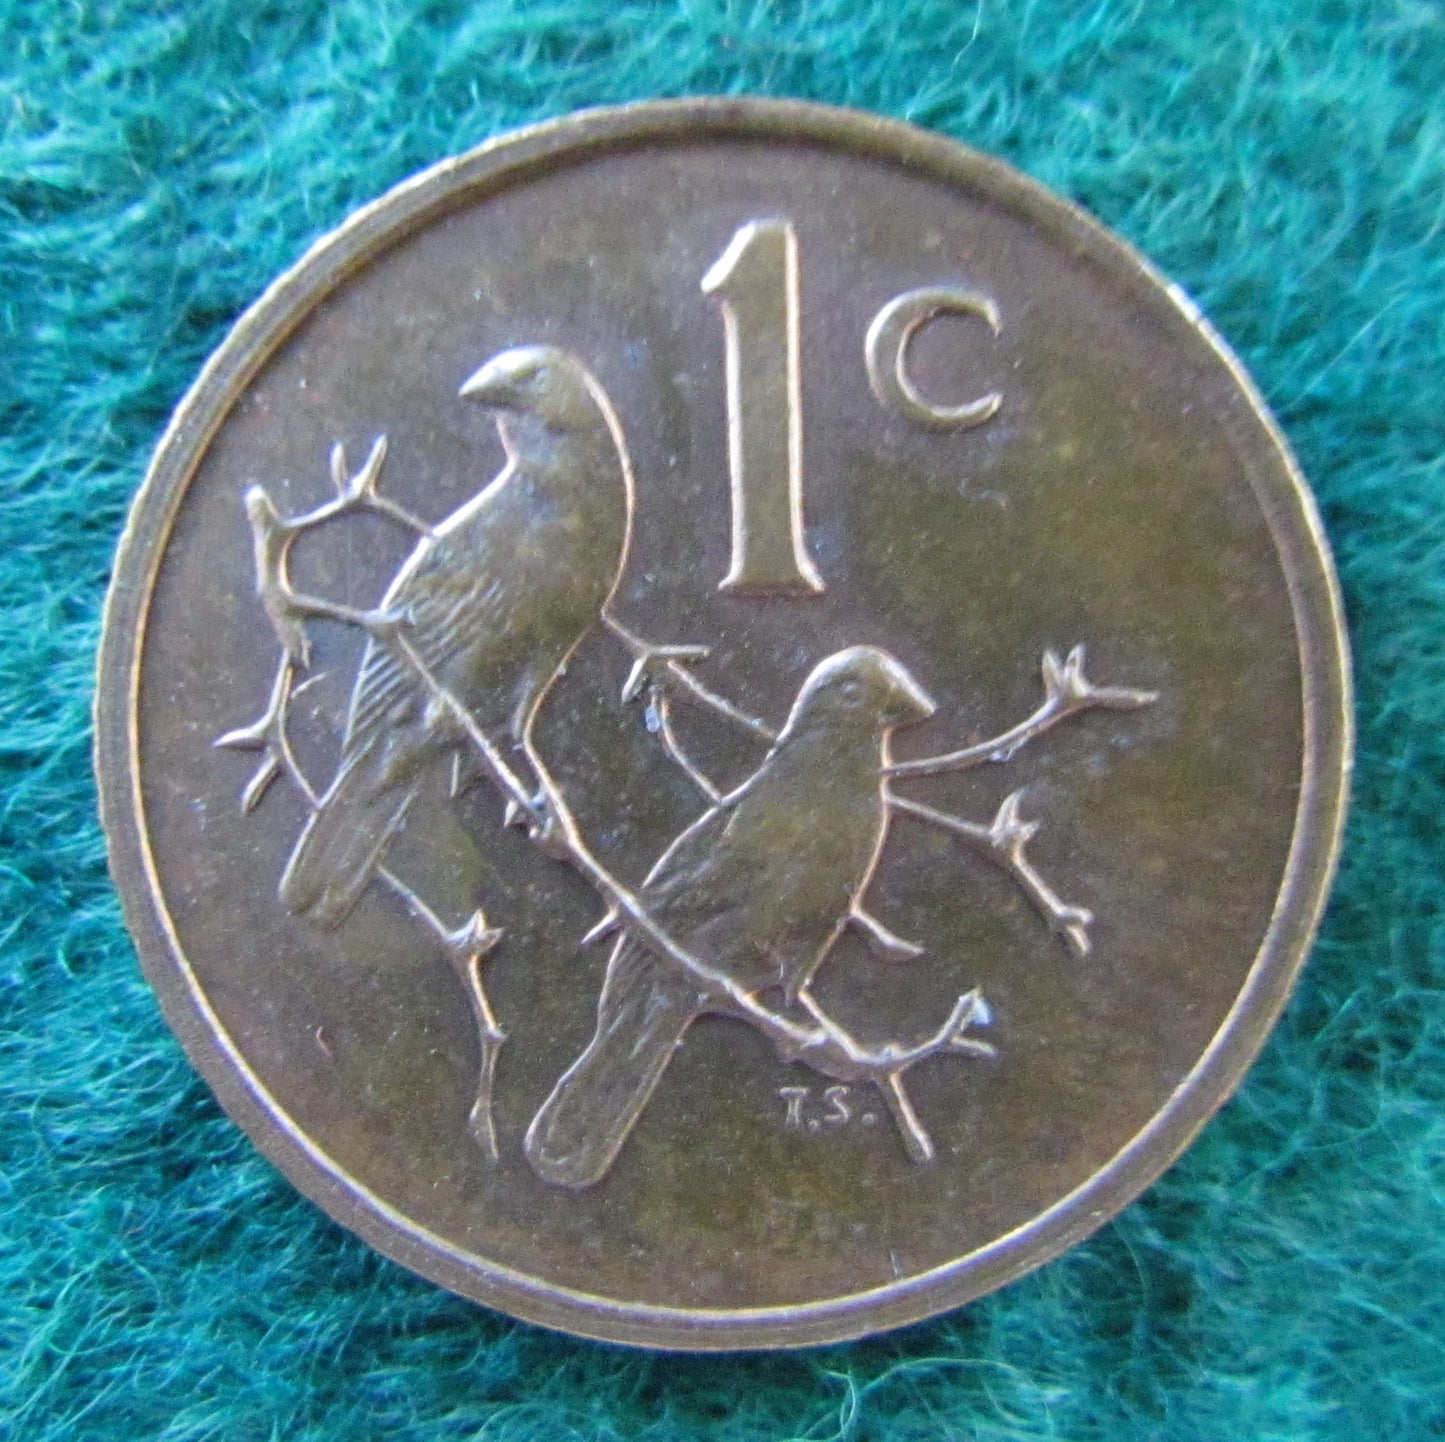 South Africa 1977 1 Cent Coin - Circulated